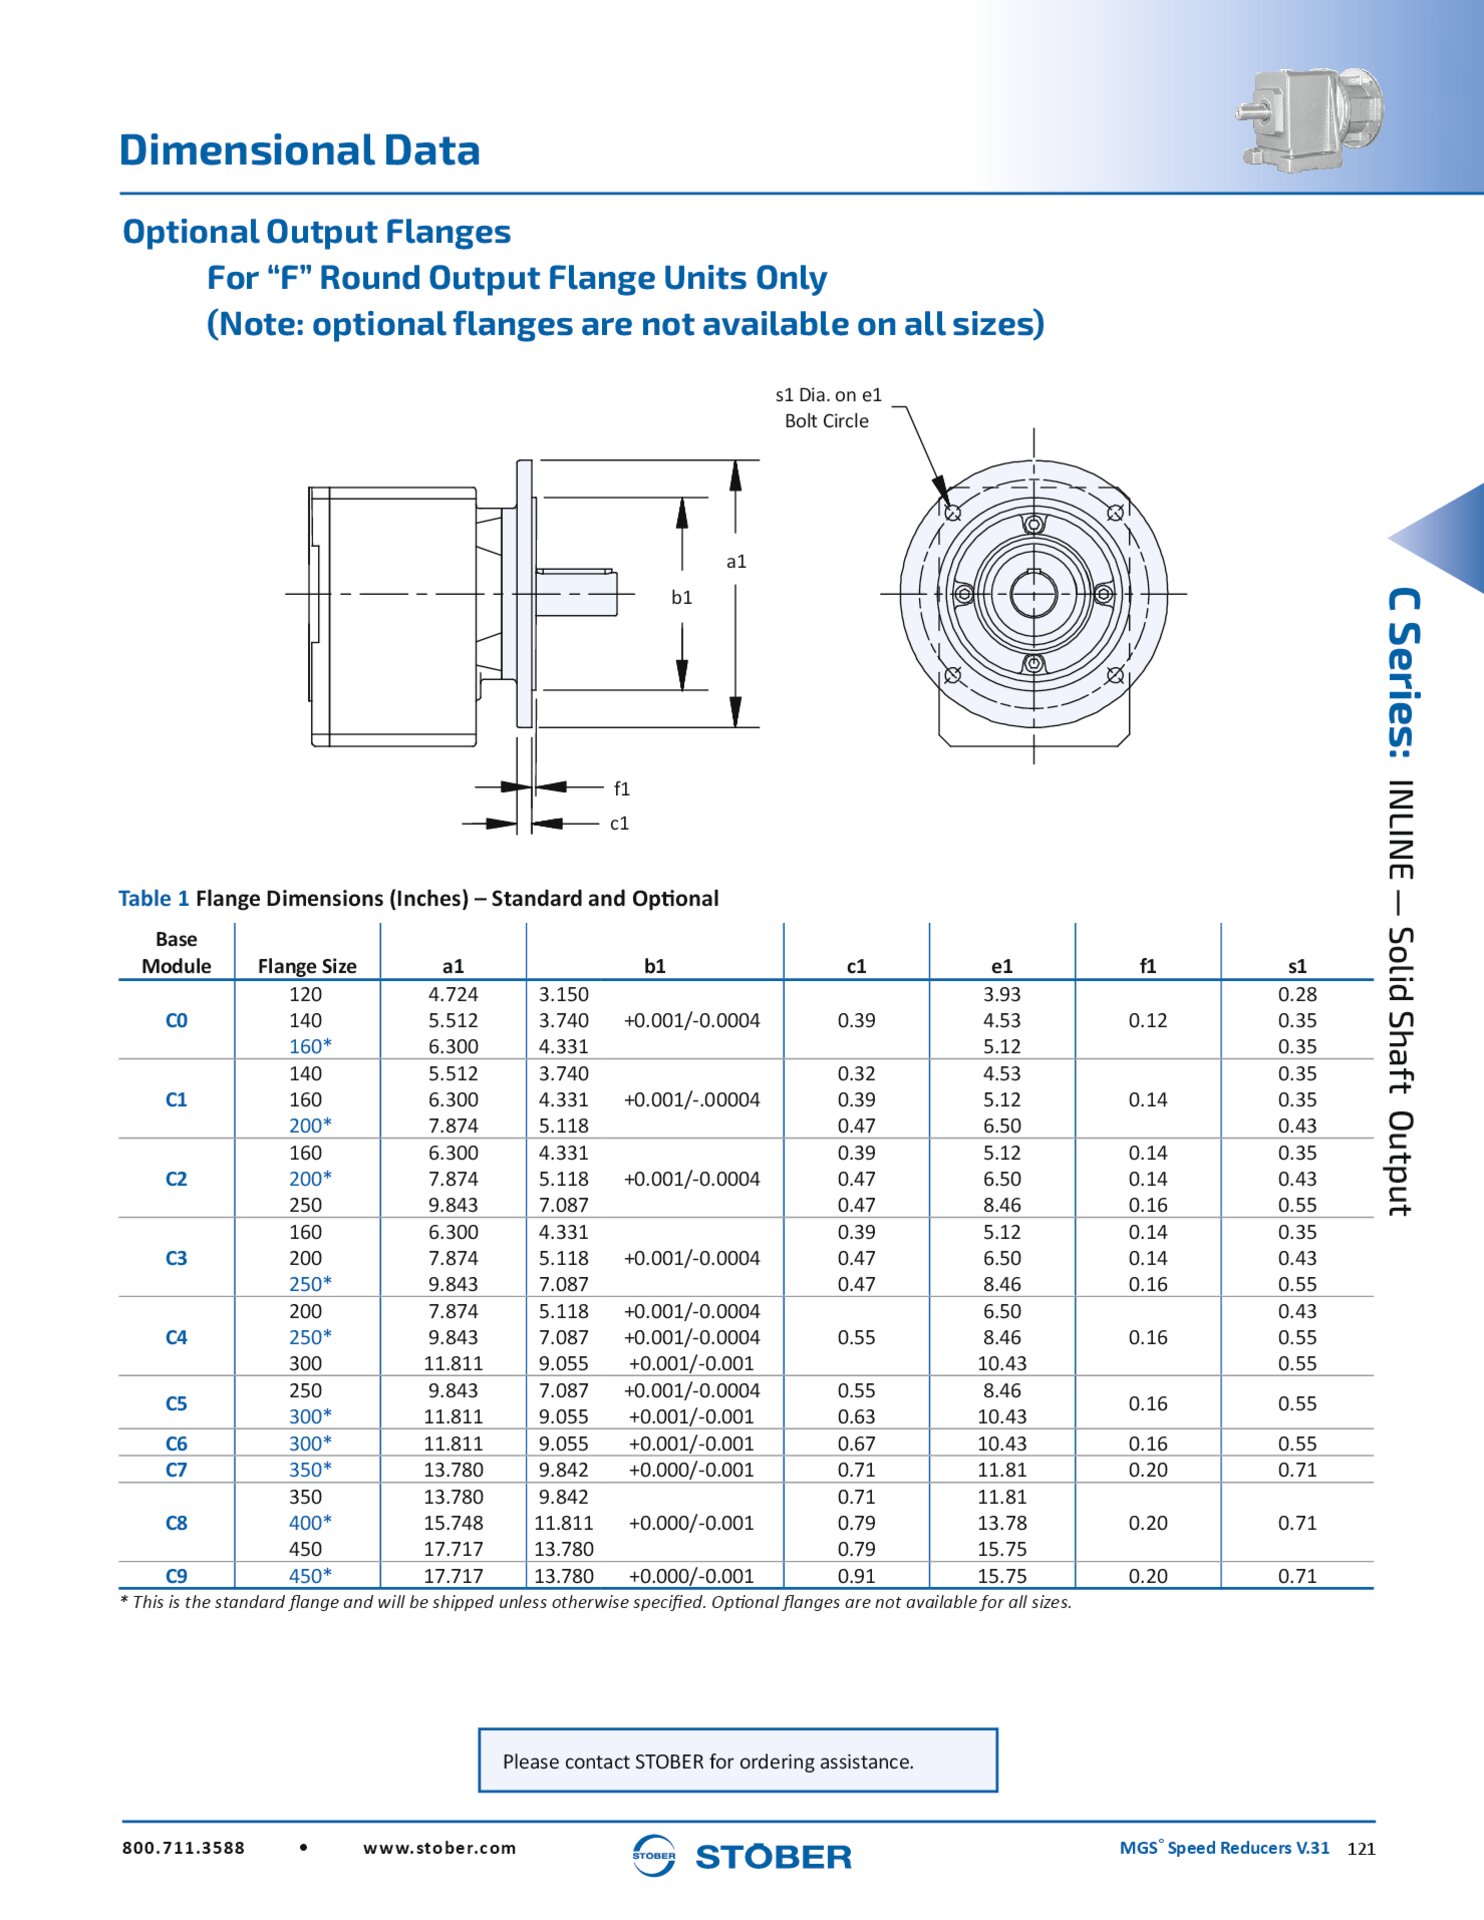 MGS Speed Reducers C Dimensions